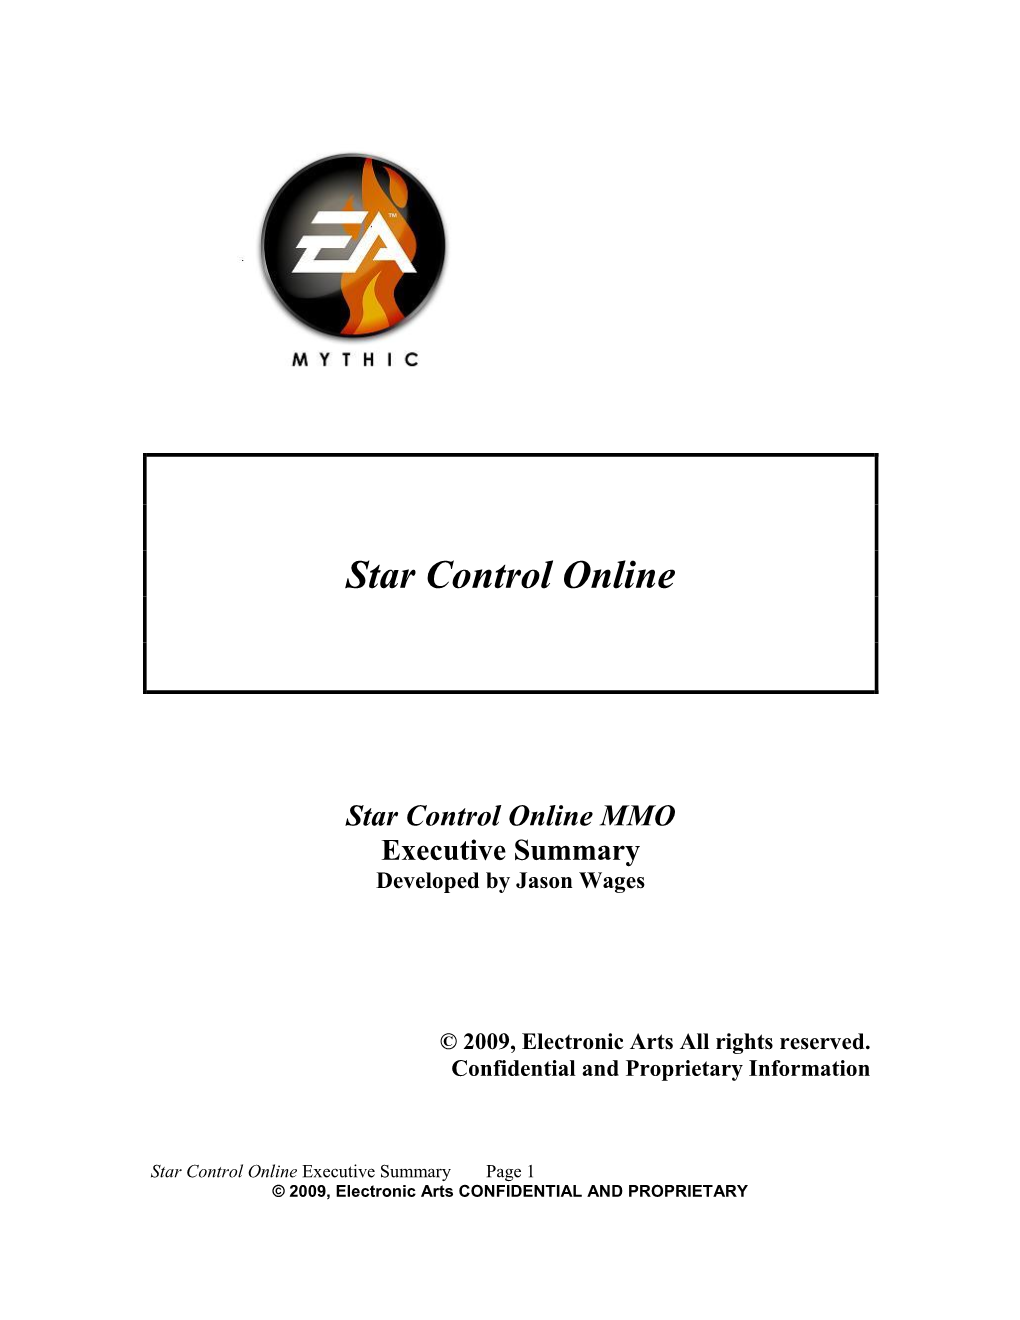 Star Control Online MMO Executive Summary Developed by Jason Wages